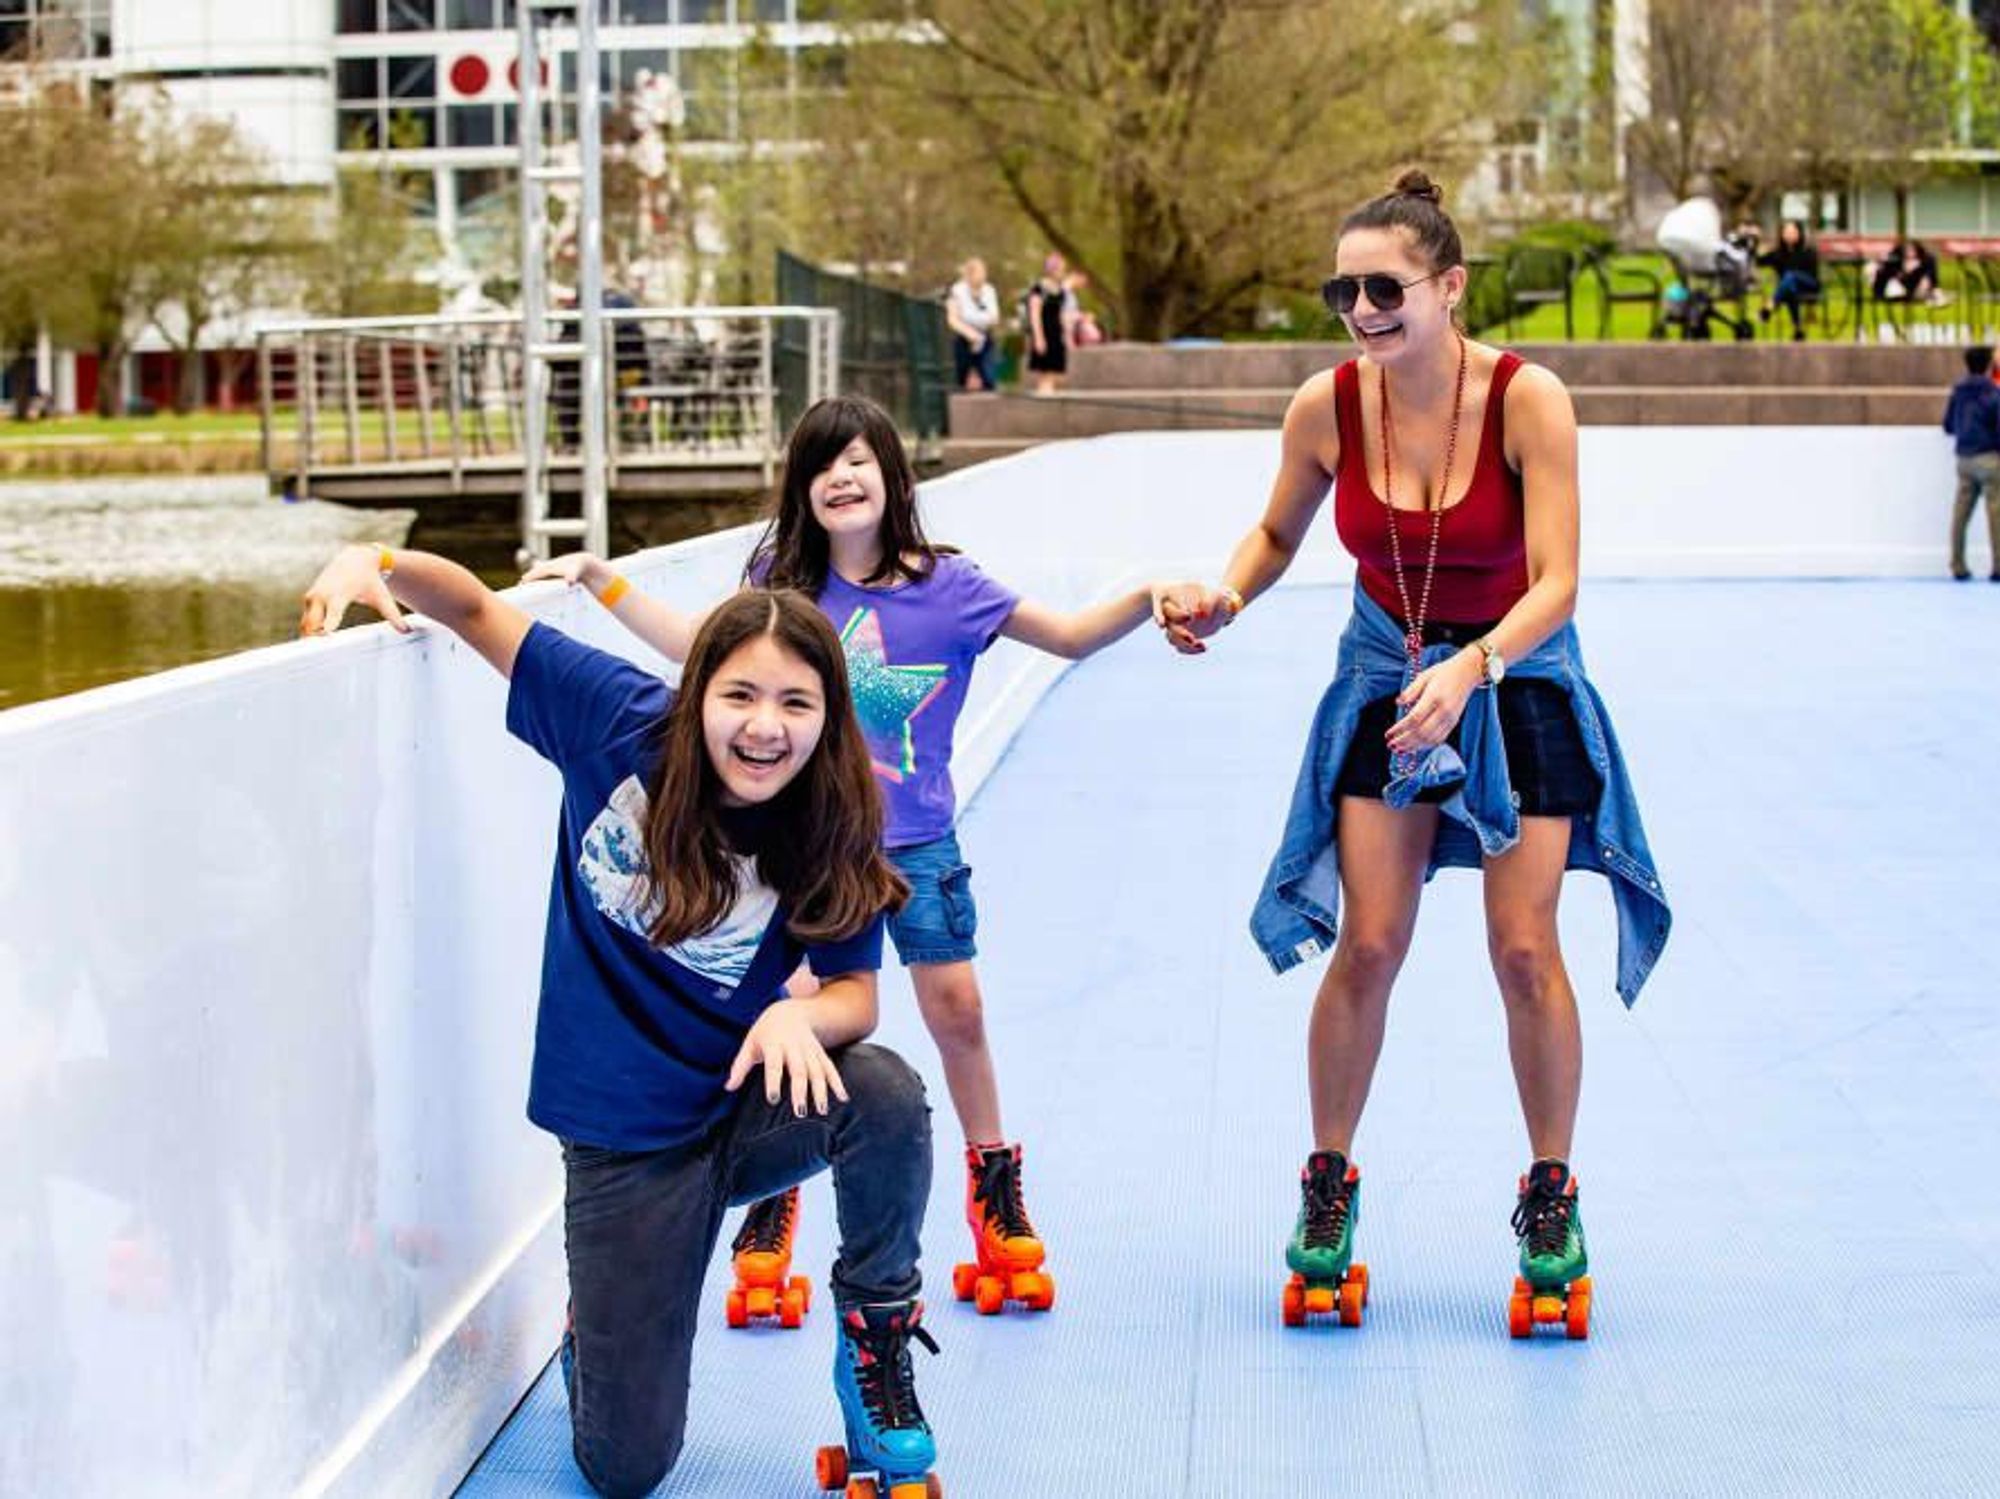 Discover the Cost of Admission to the Skating Rink